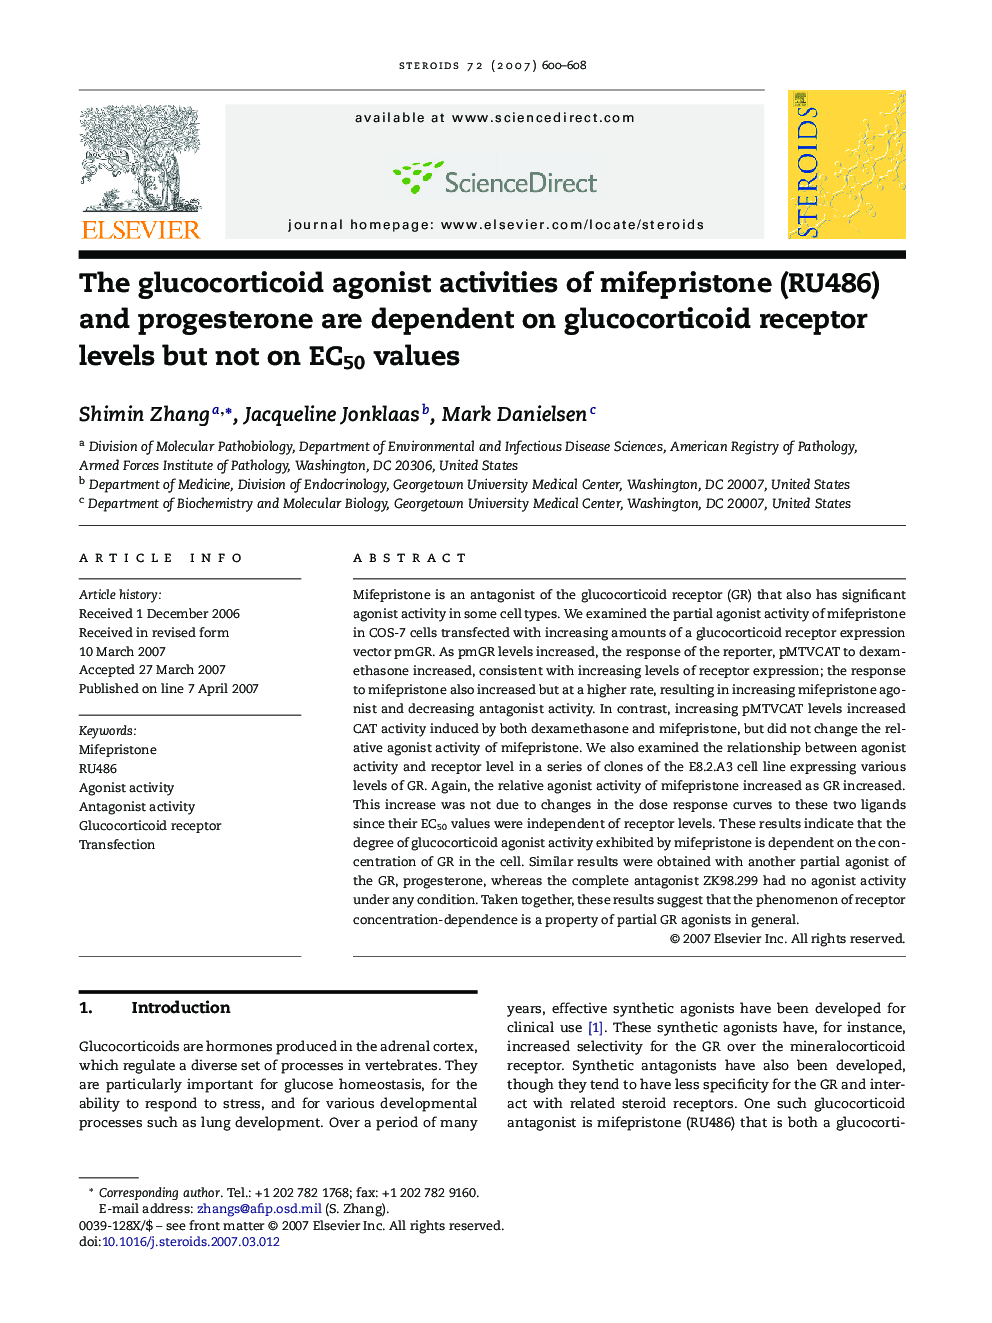 The glucocorticoid agonist activities of mifepristone (RU486) and progesterone are dependent on glucocorticoid receptor levels but not on EC50 values